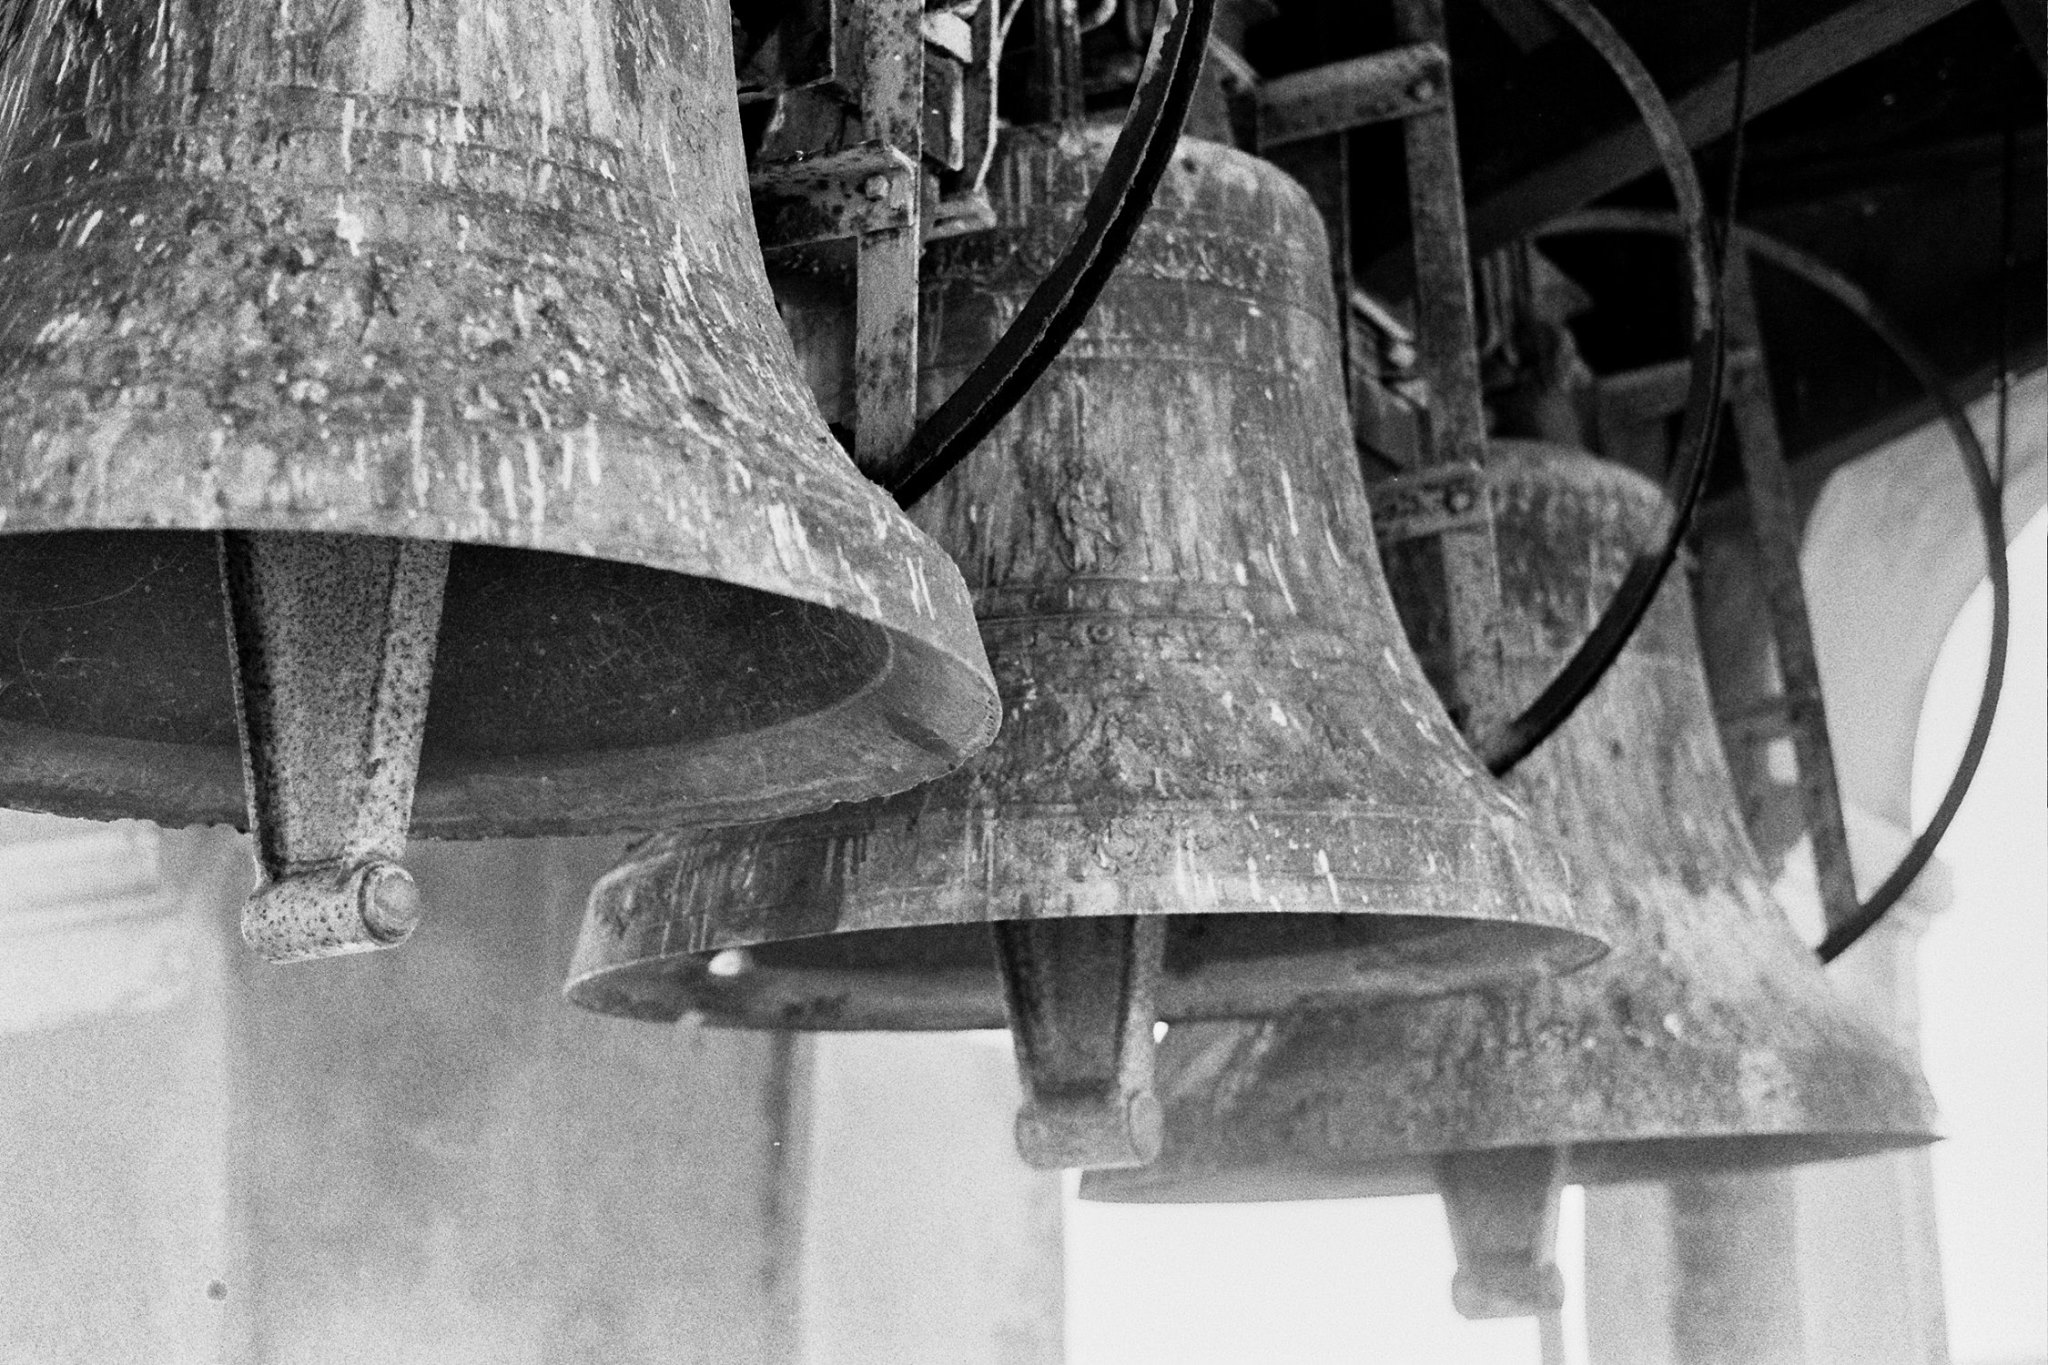 For whom the bell tolls...